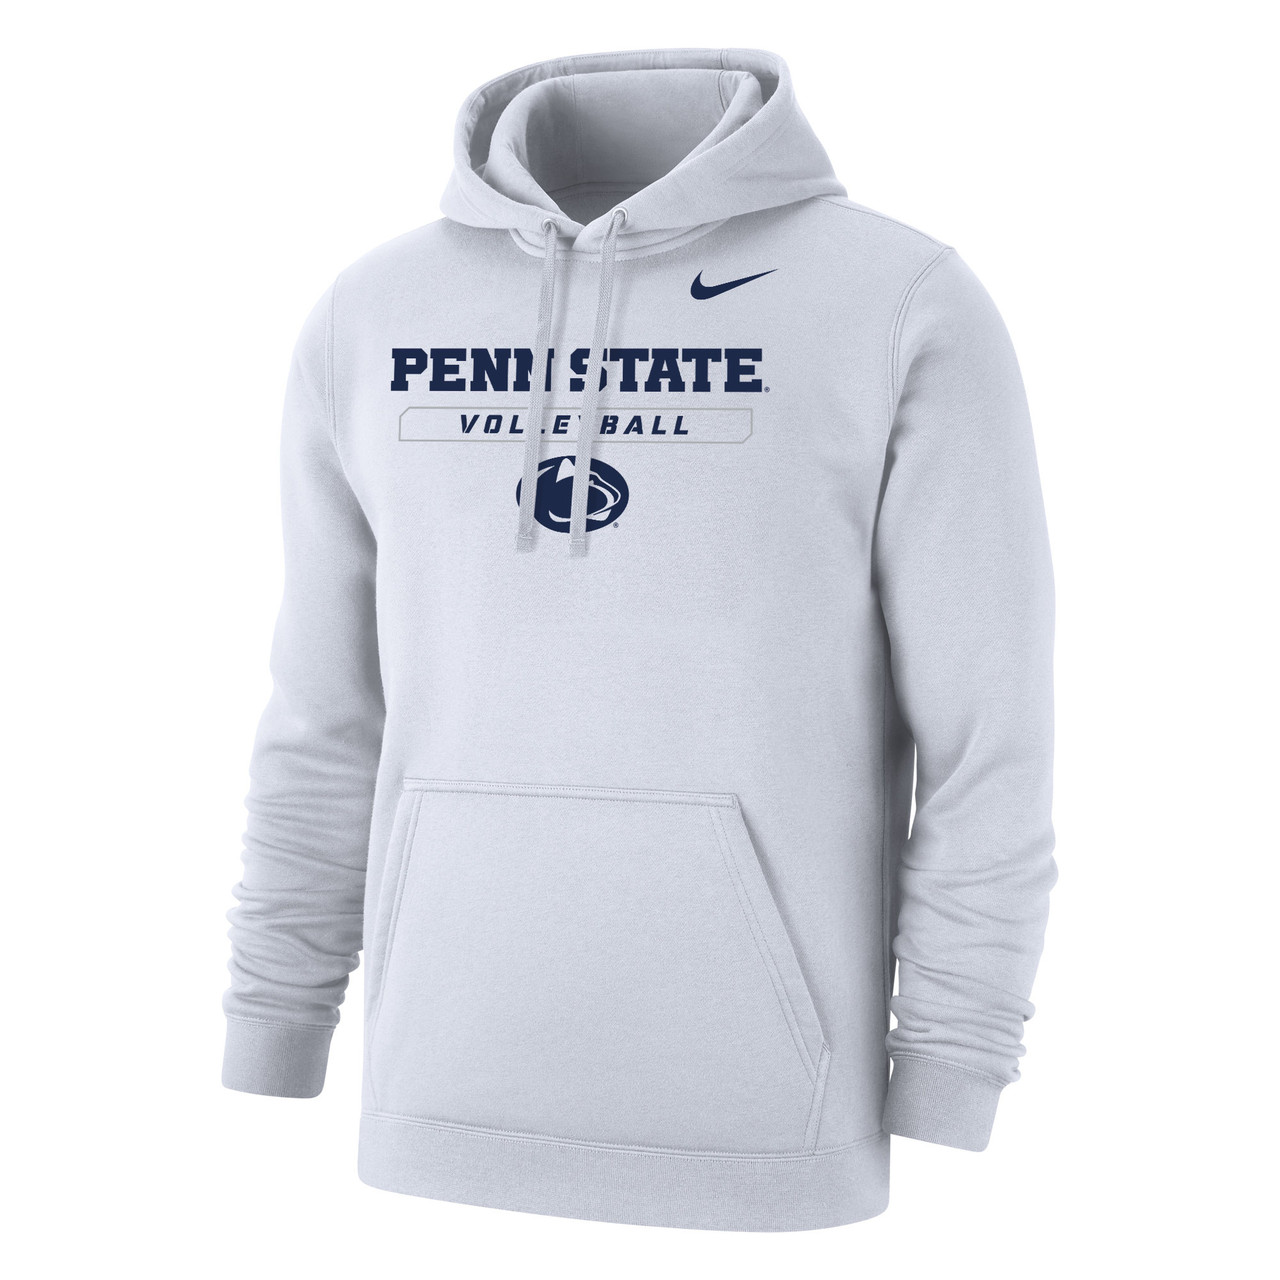 Nike Men's Volleyball Penn State Club Fleece Pullover Hoodie - White